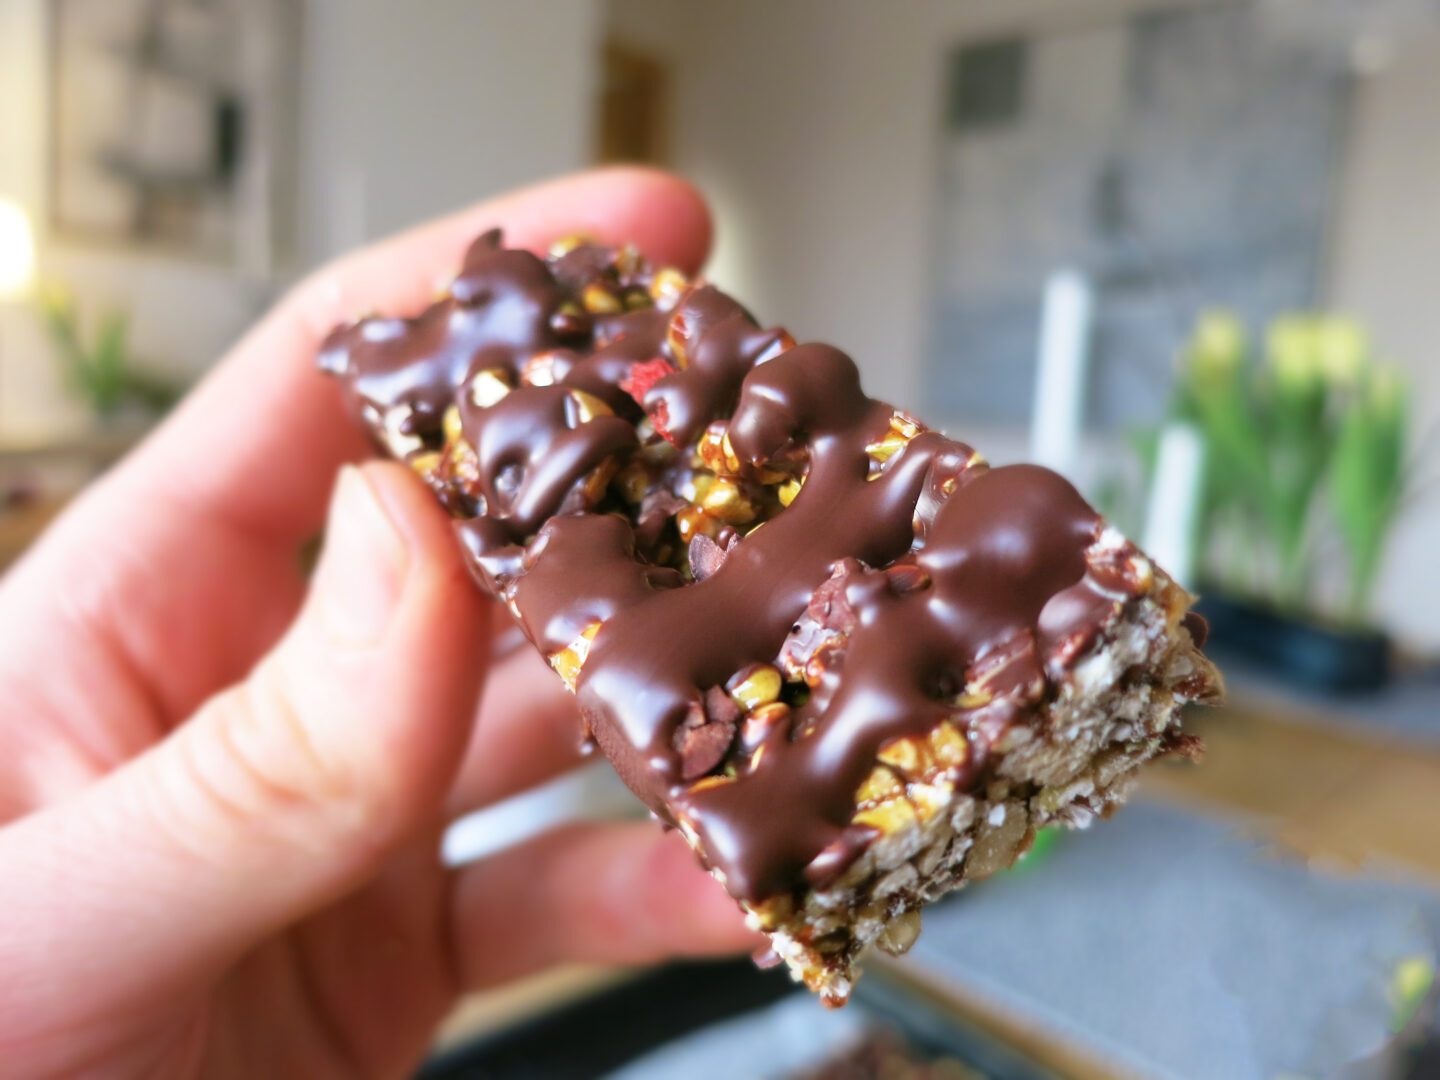 Caramelized Buckwheat Nut Crunch Bars with Chocolate Drizzle